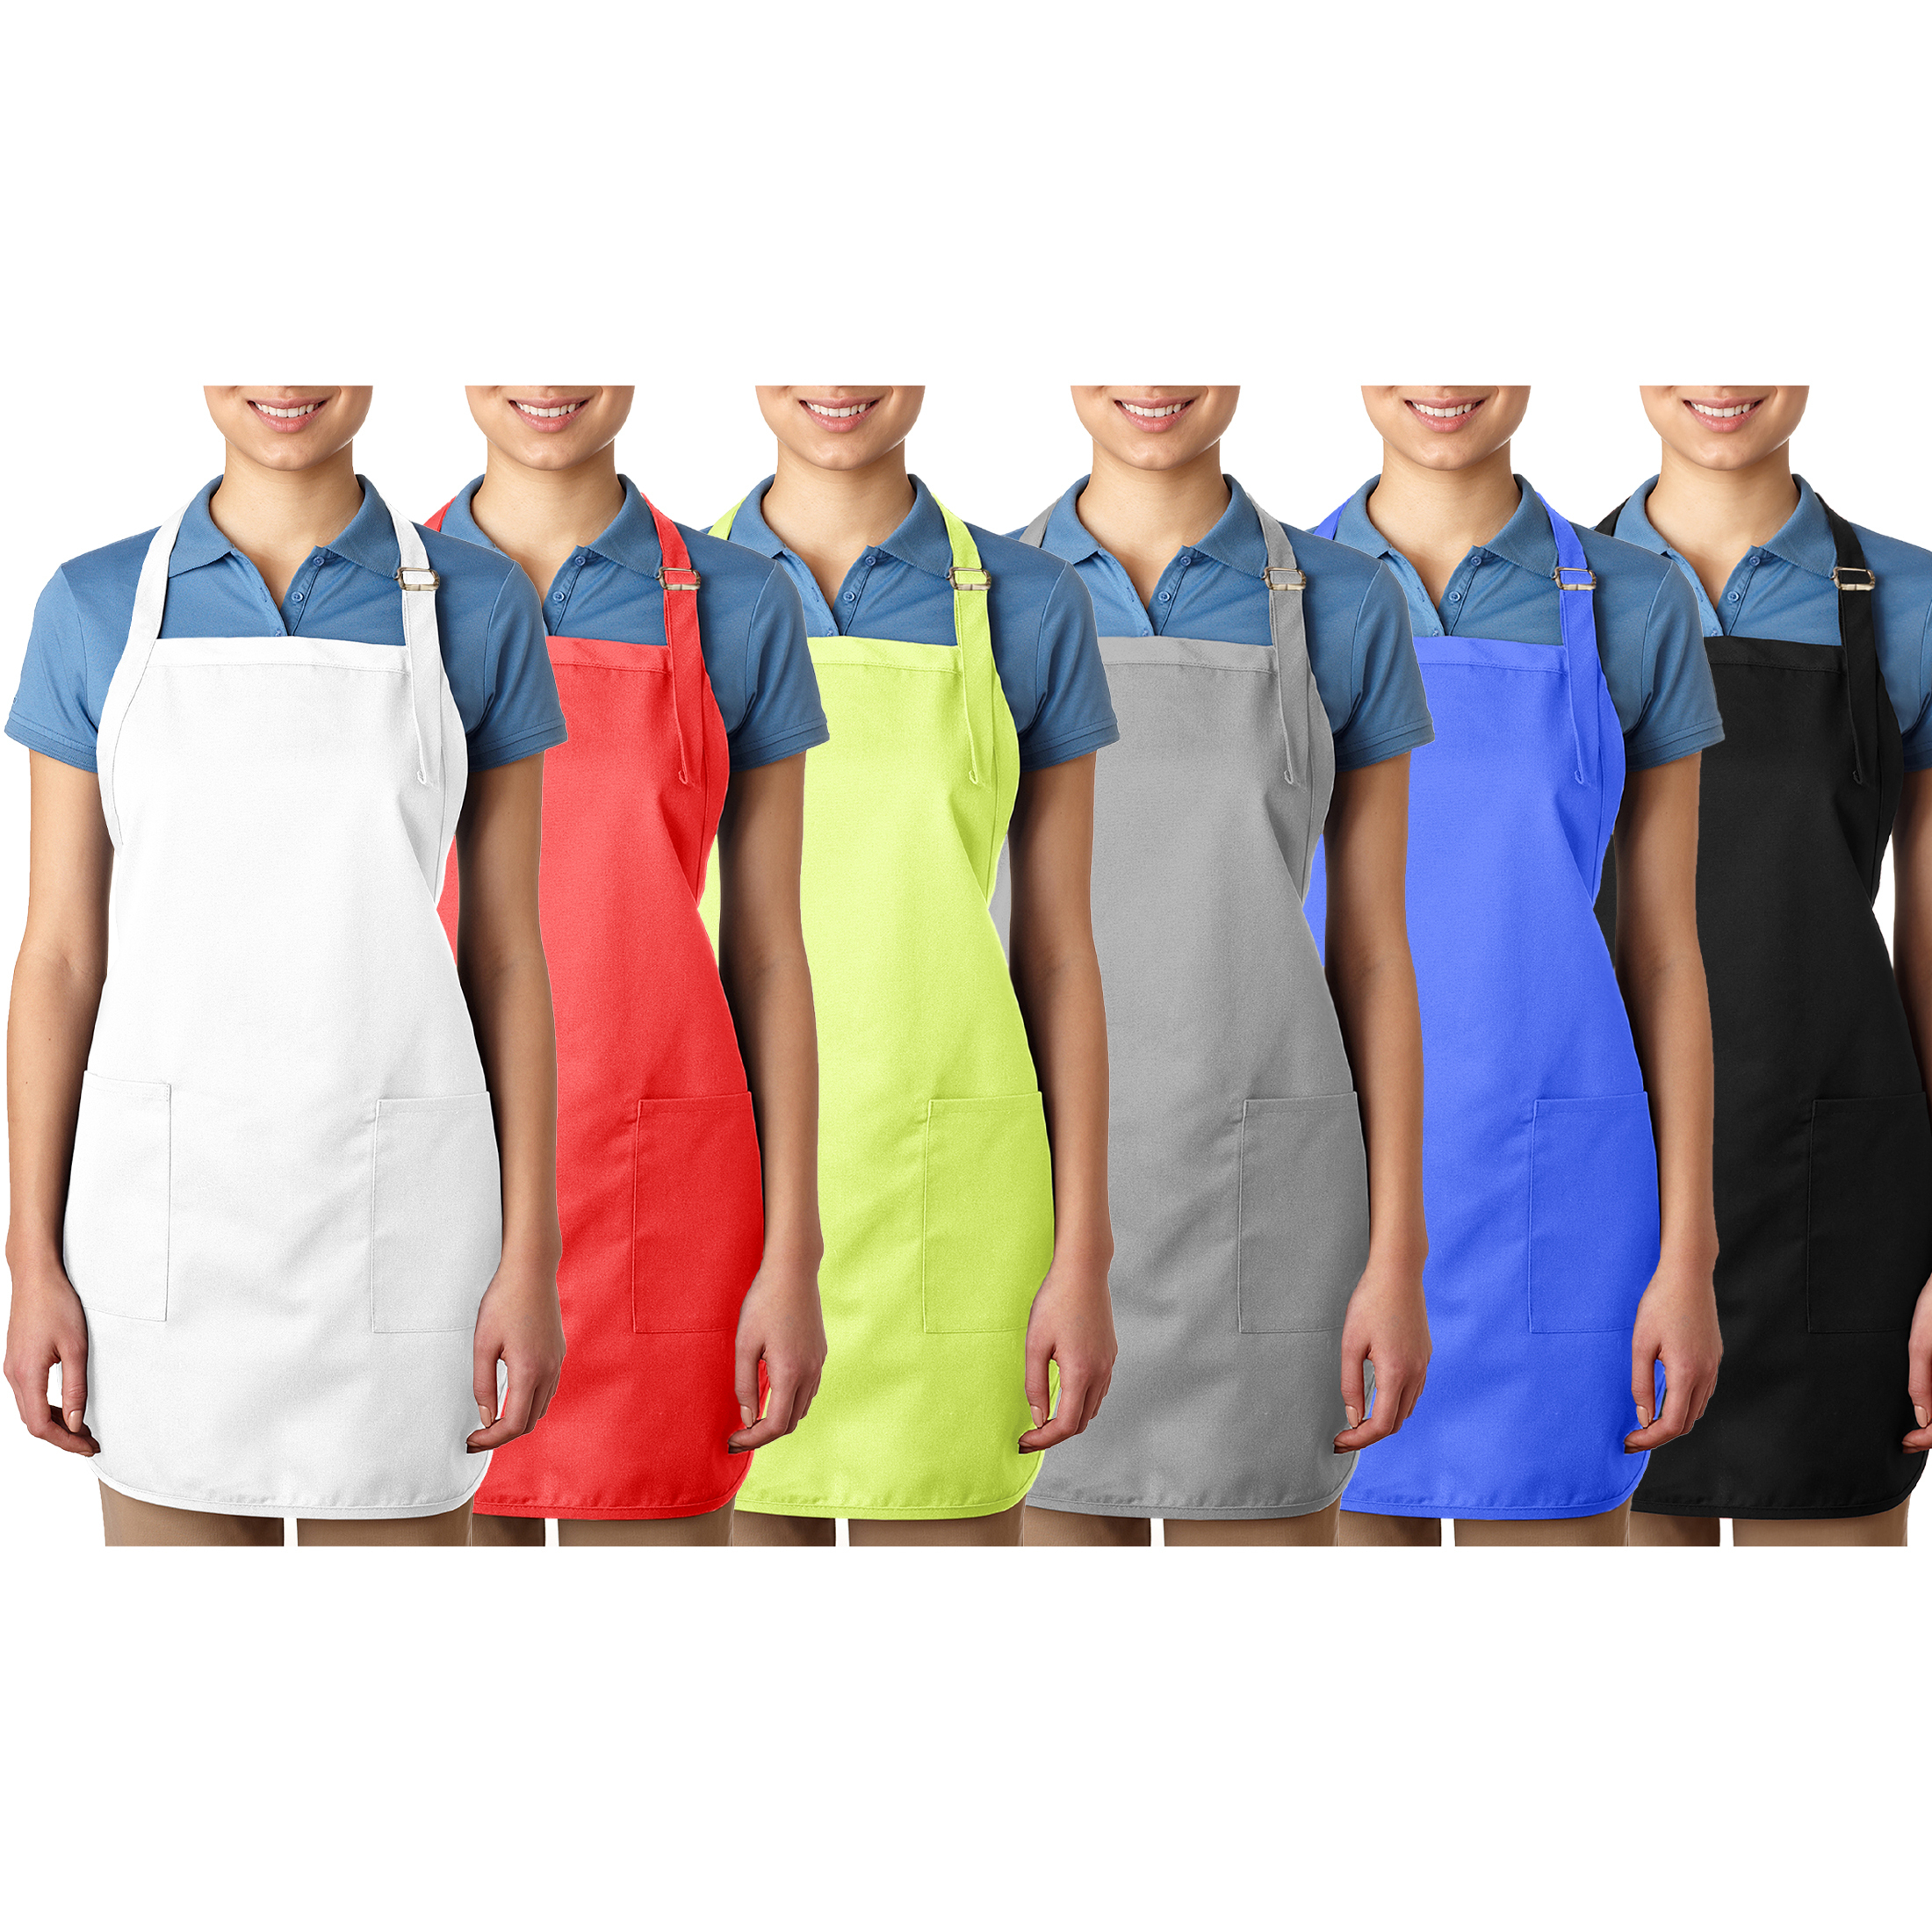 Multi-pack Unisex Deluxe Adjustable Bib Apron With Pockets - 1-Pack